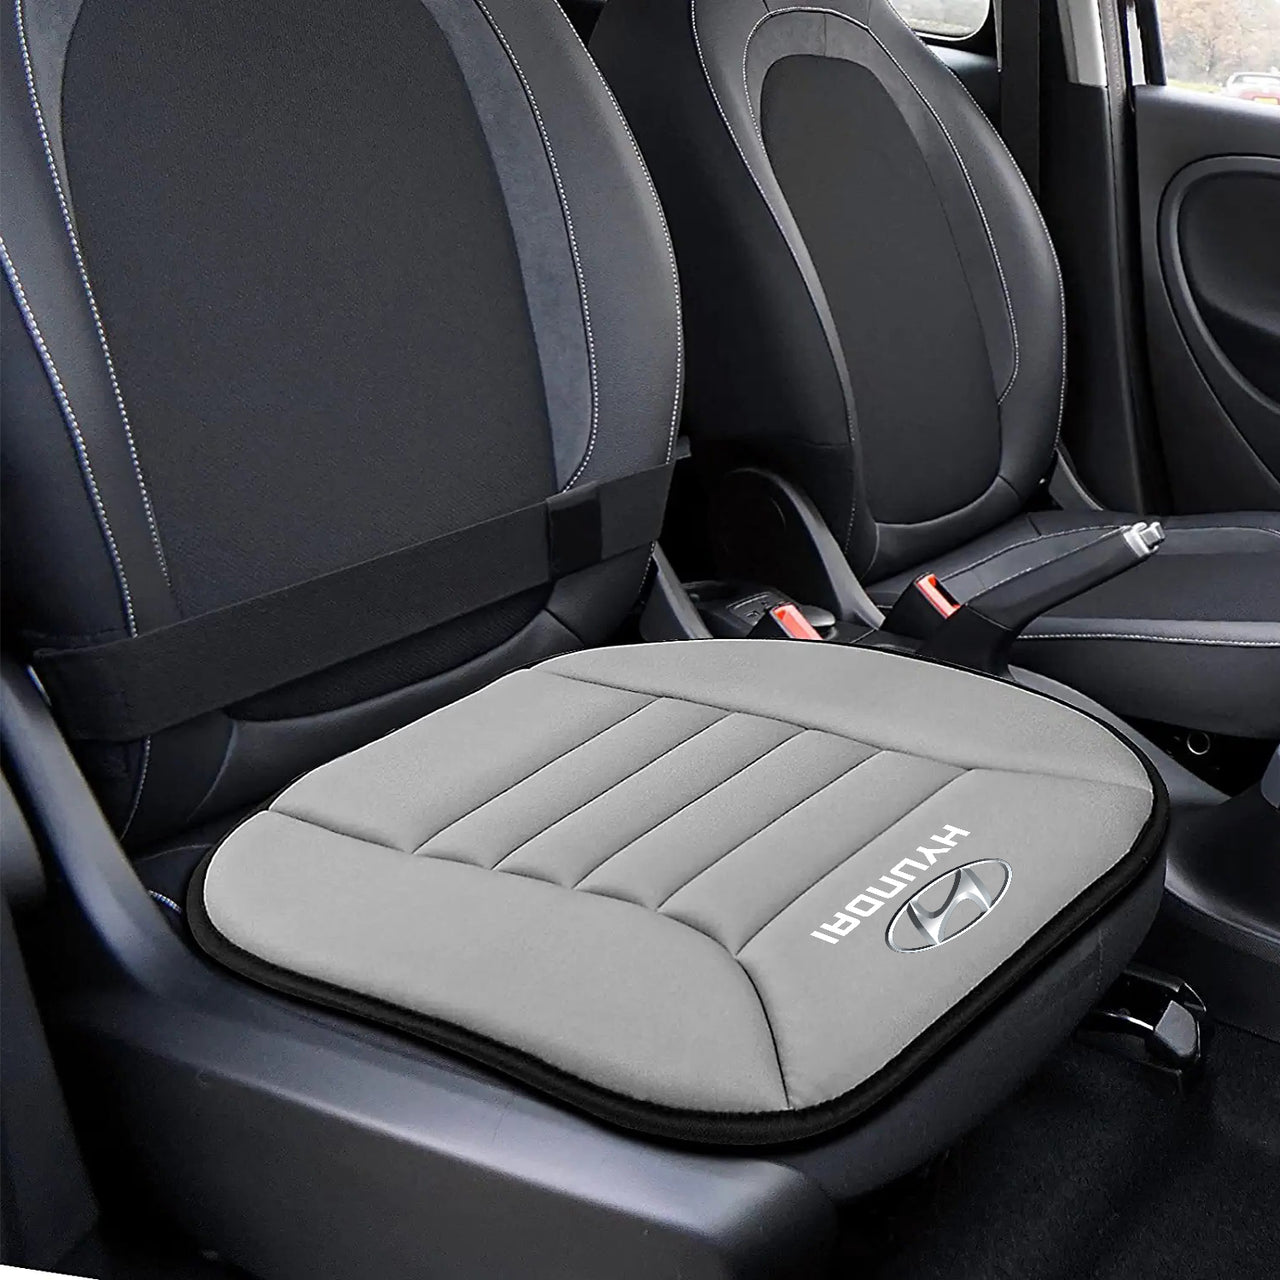 Car Seat Cushion with 1.2inch Comfort Memory Foam, Custom Logo For Your Cars, Seat Cushion for Car and Office Chair HY19989